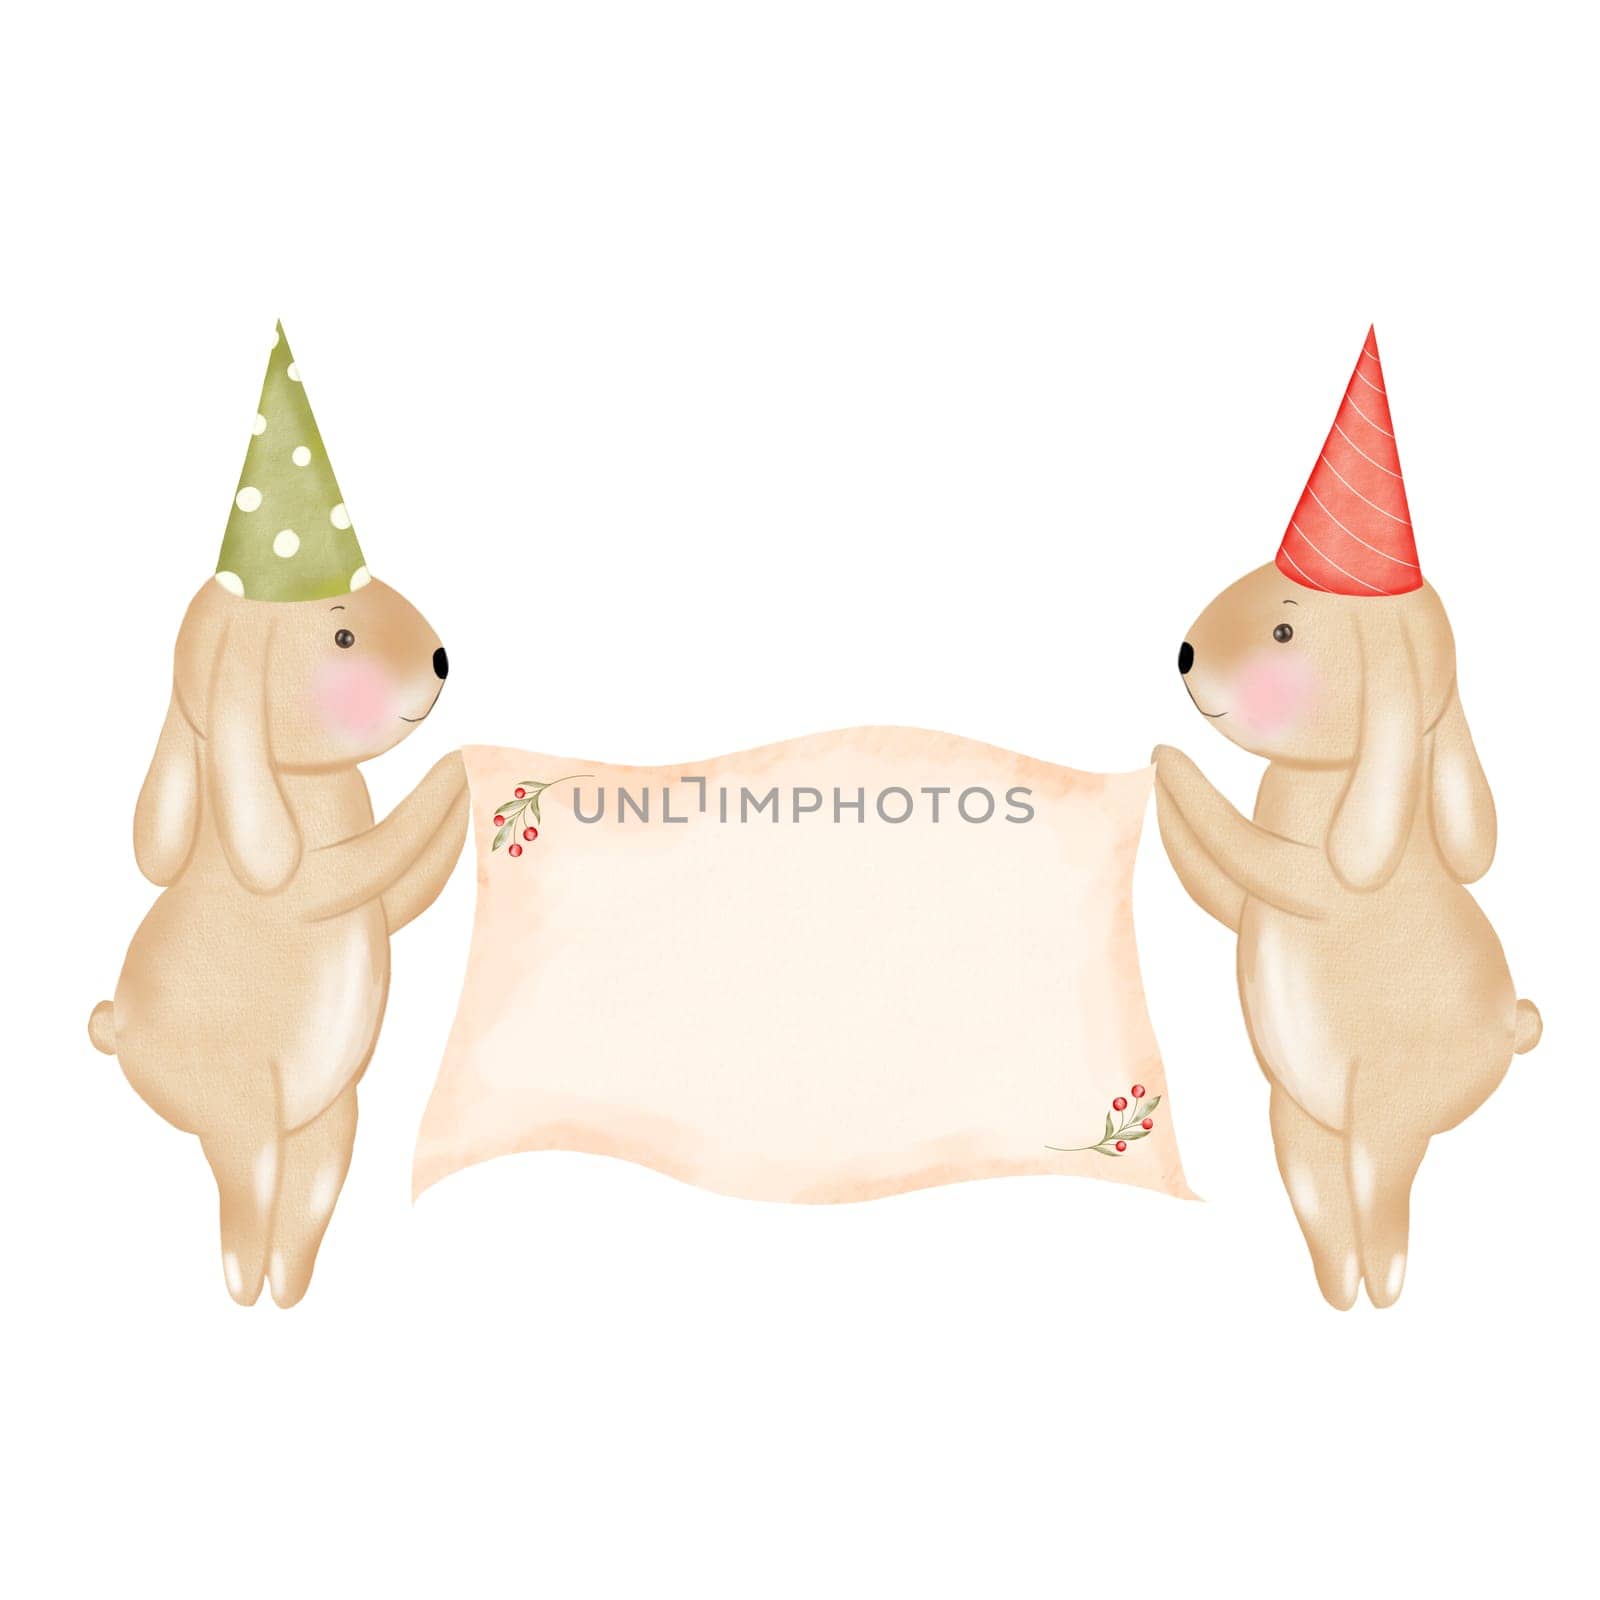 Cute bunnies with a poster for congratulations. Watercolor hand drawing of cartoon bunnies in birthday caps holding a poster for an inscription. Clip art of forest animals on isolated white background. For design of cards and banners for baby shower and birth